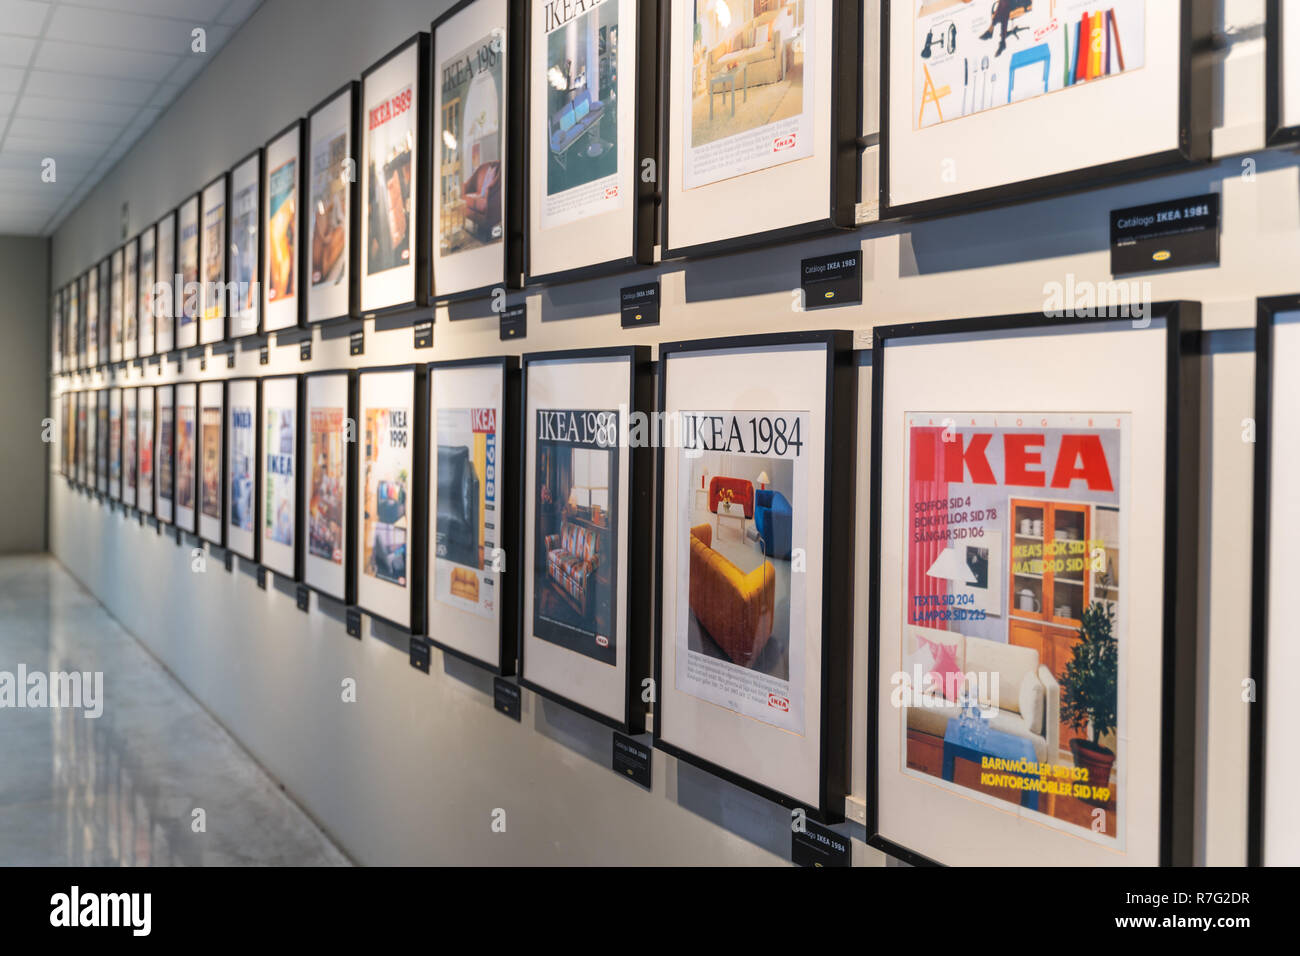 Valencia,Spain - December 09, 2018: Ikea store lot in Alfafar, Valencia. Exhibition of the old Ikea catalogs, framed on the wall. Vintage Ikea gallery Stock Photo